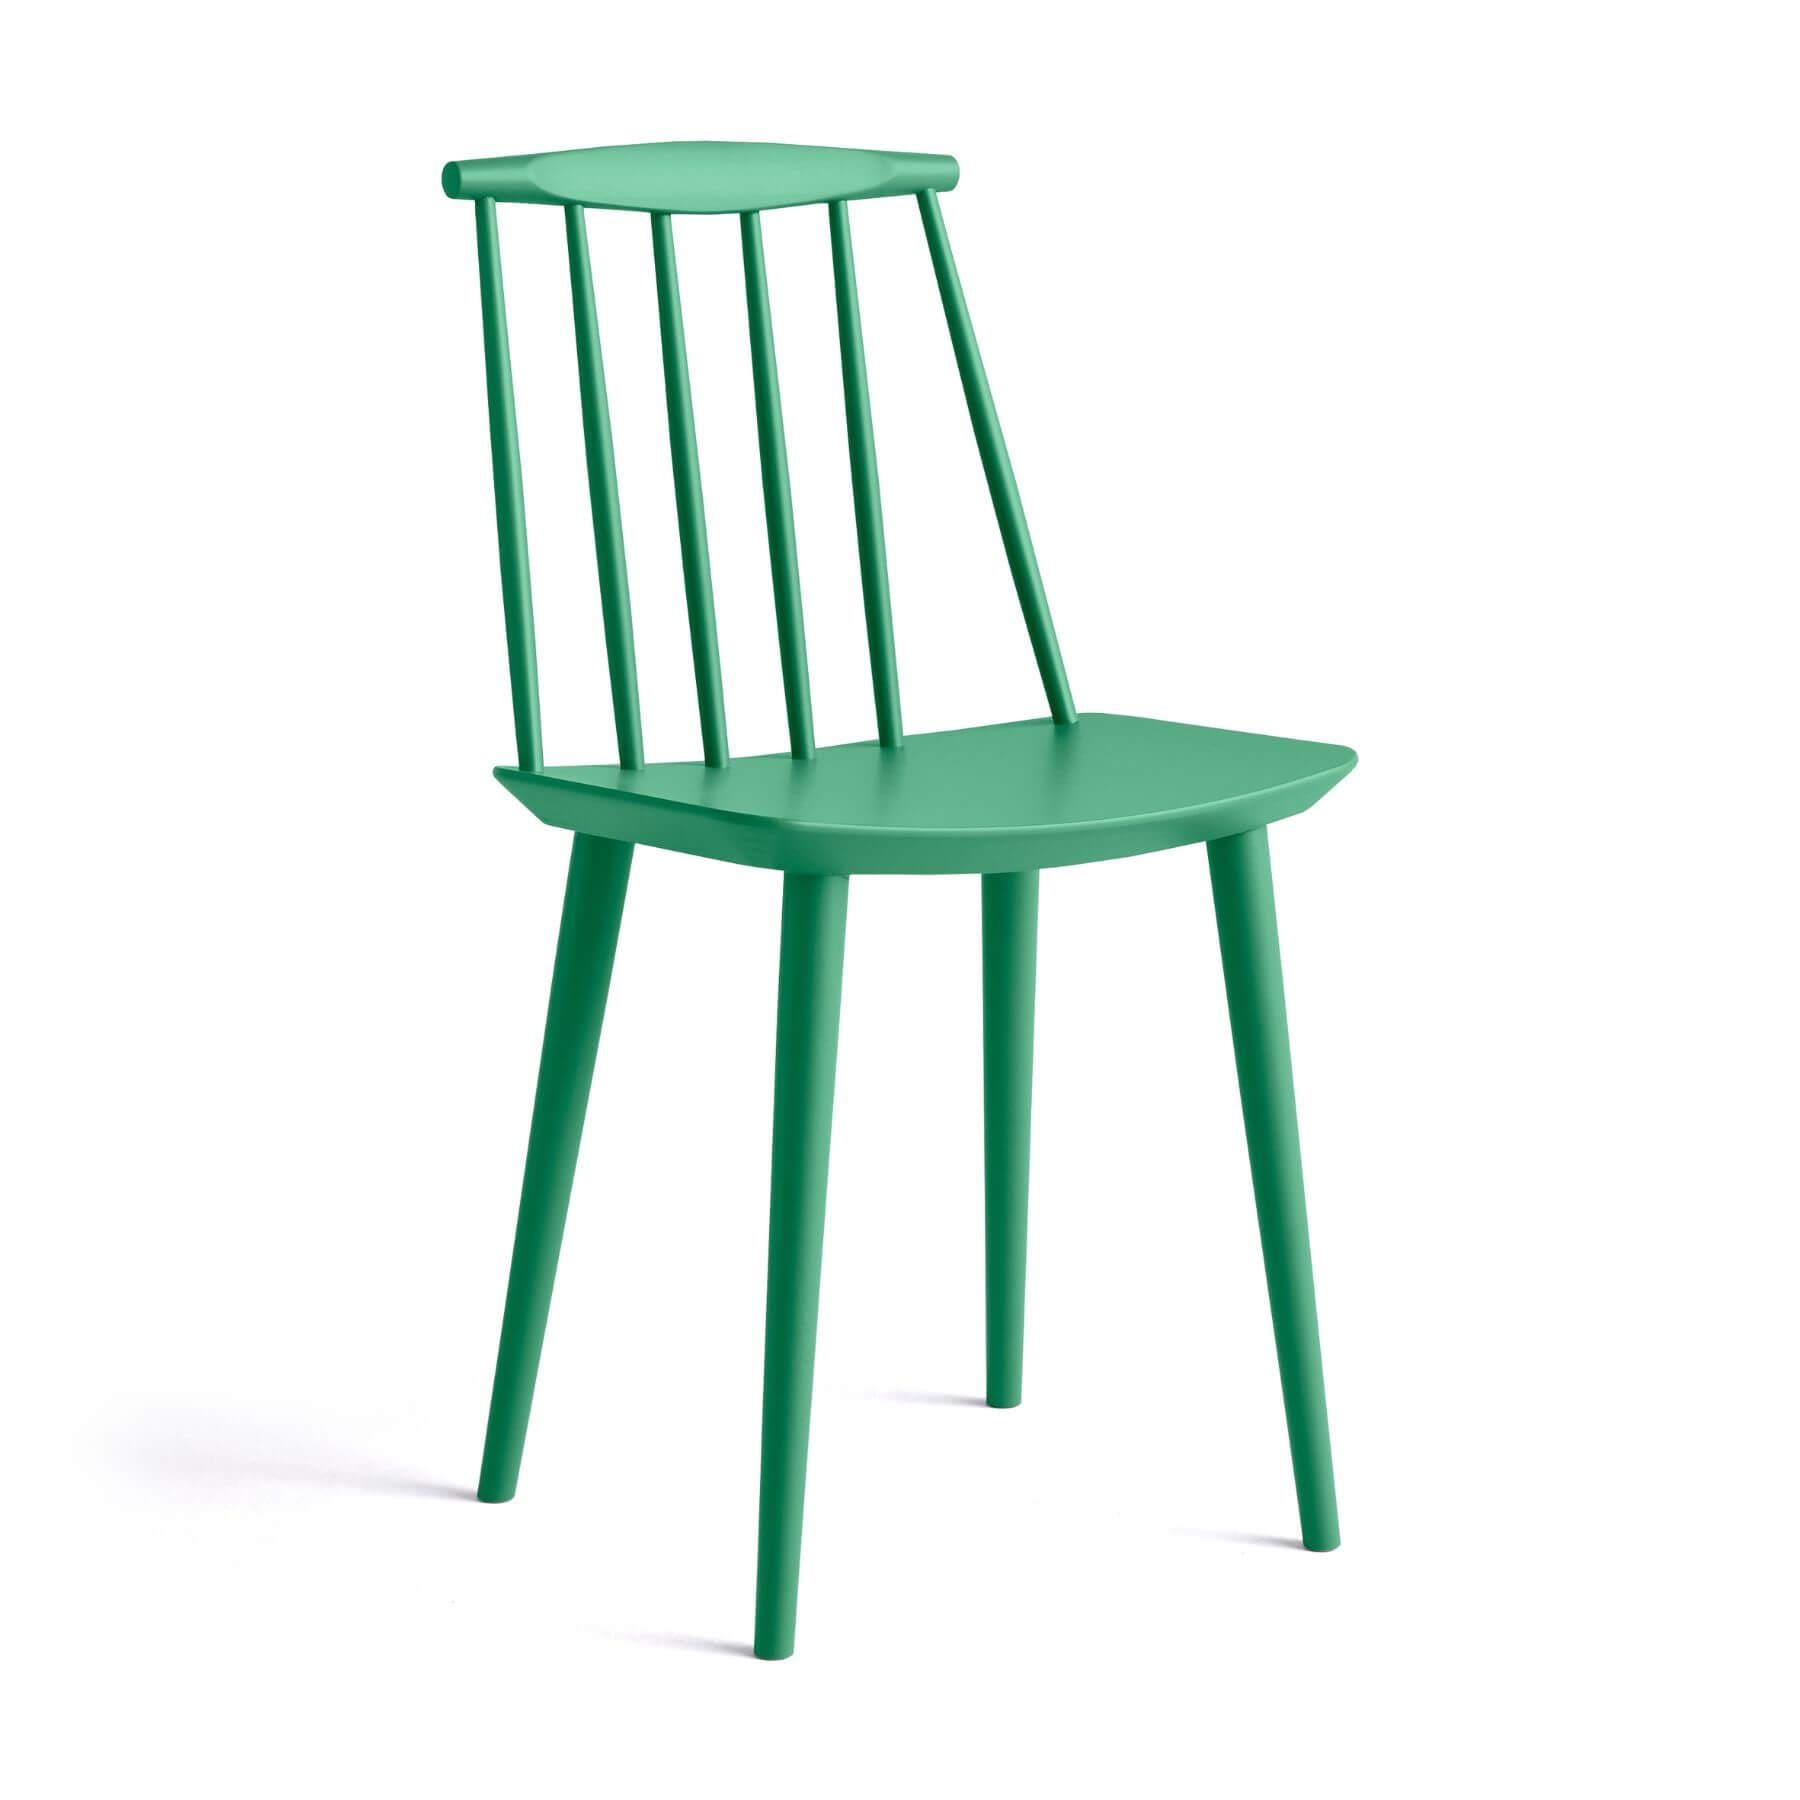 Hay Jseries 77 Dining Chair Beech Lacquered Jade Green Designer Furniture From Holloways Of Ludlow